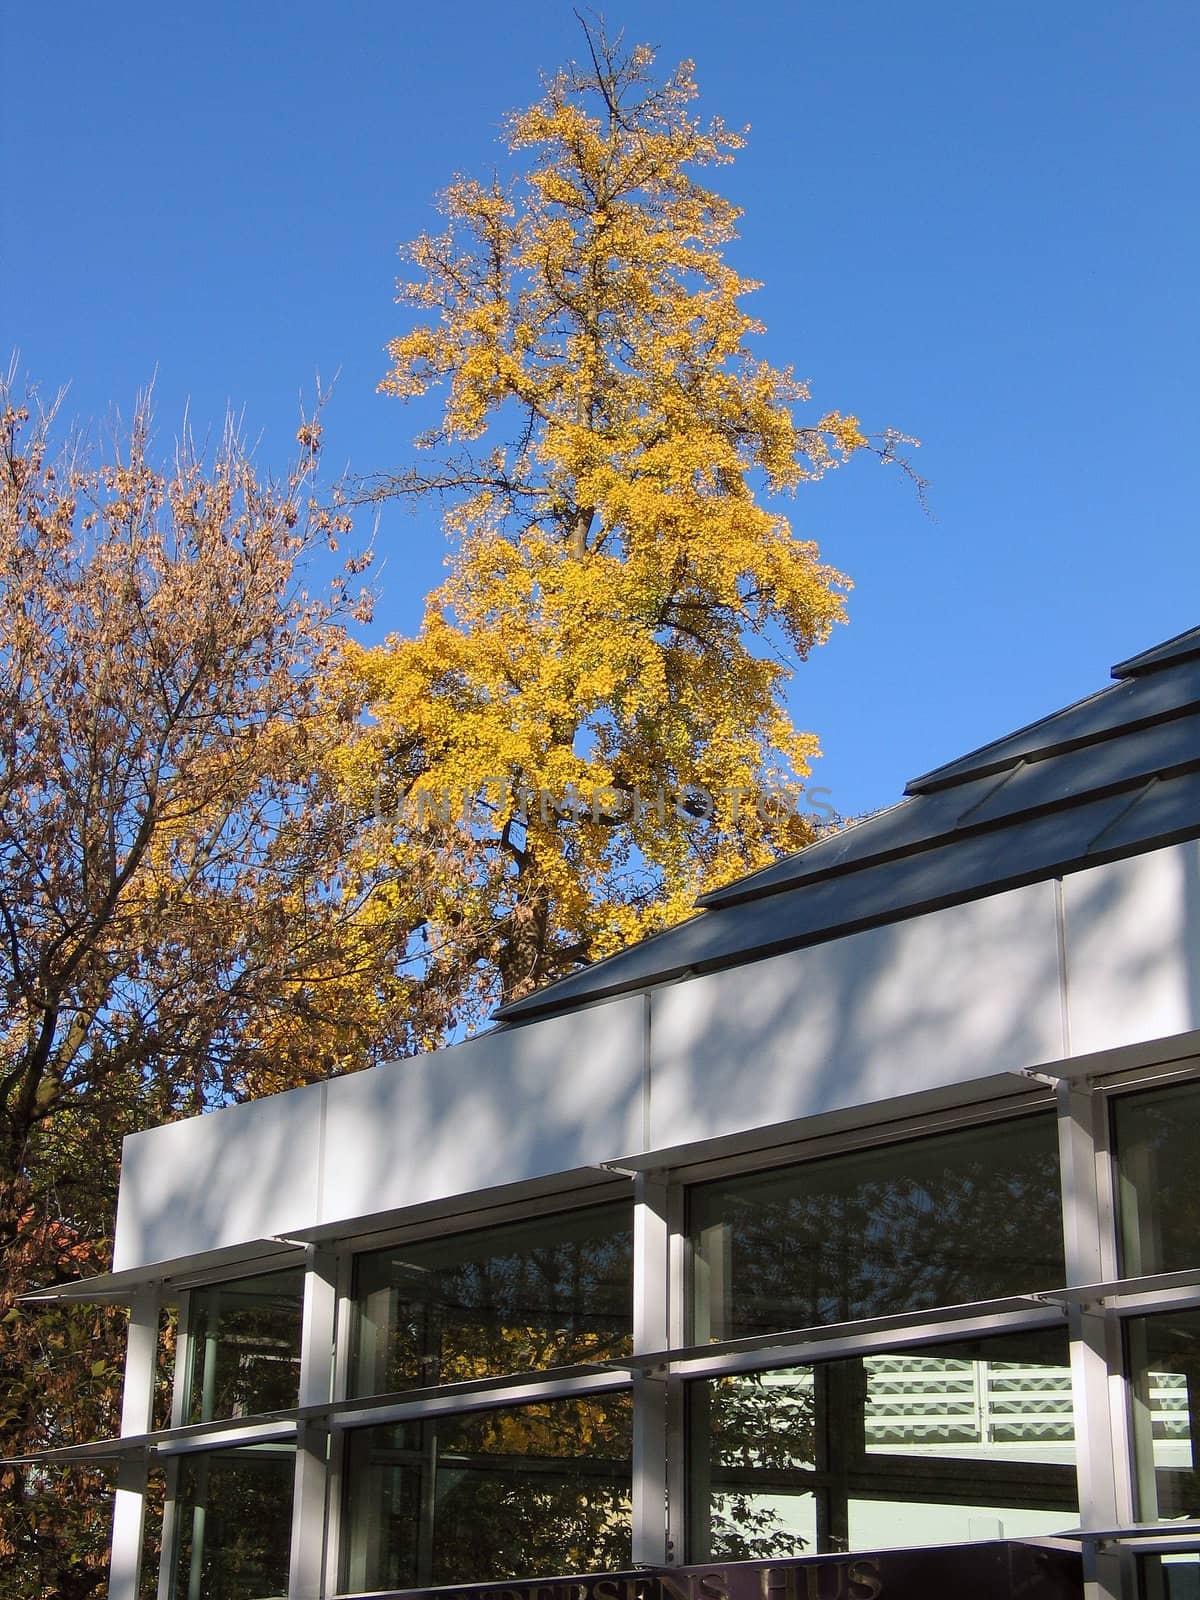 Urban scene - Autumn leaves on a tree next to a modern building